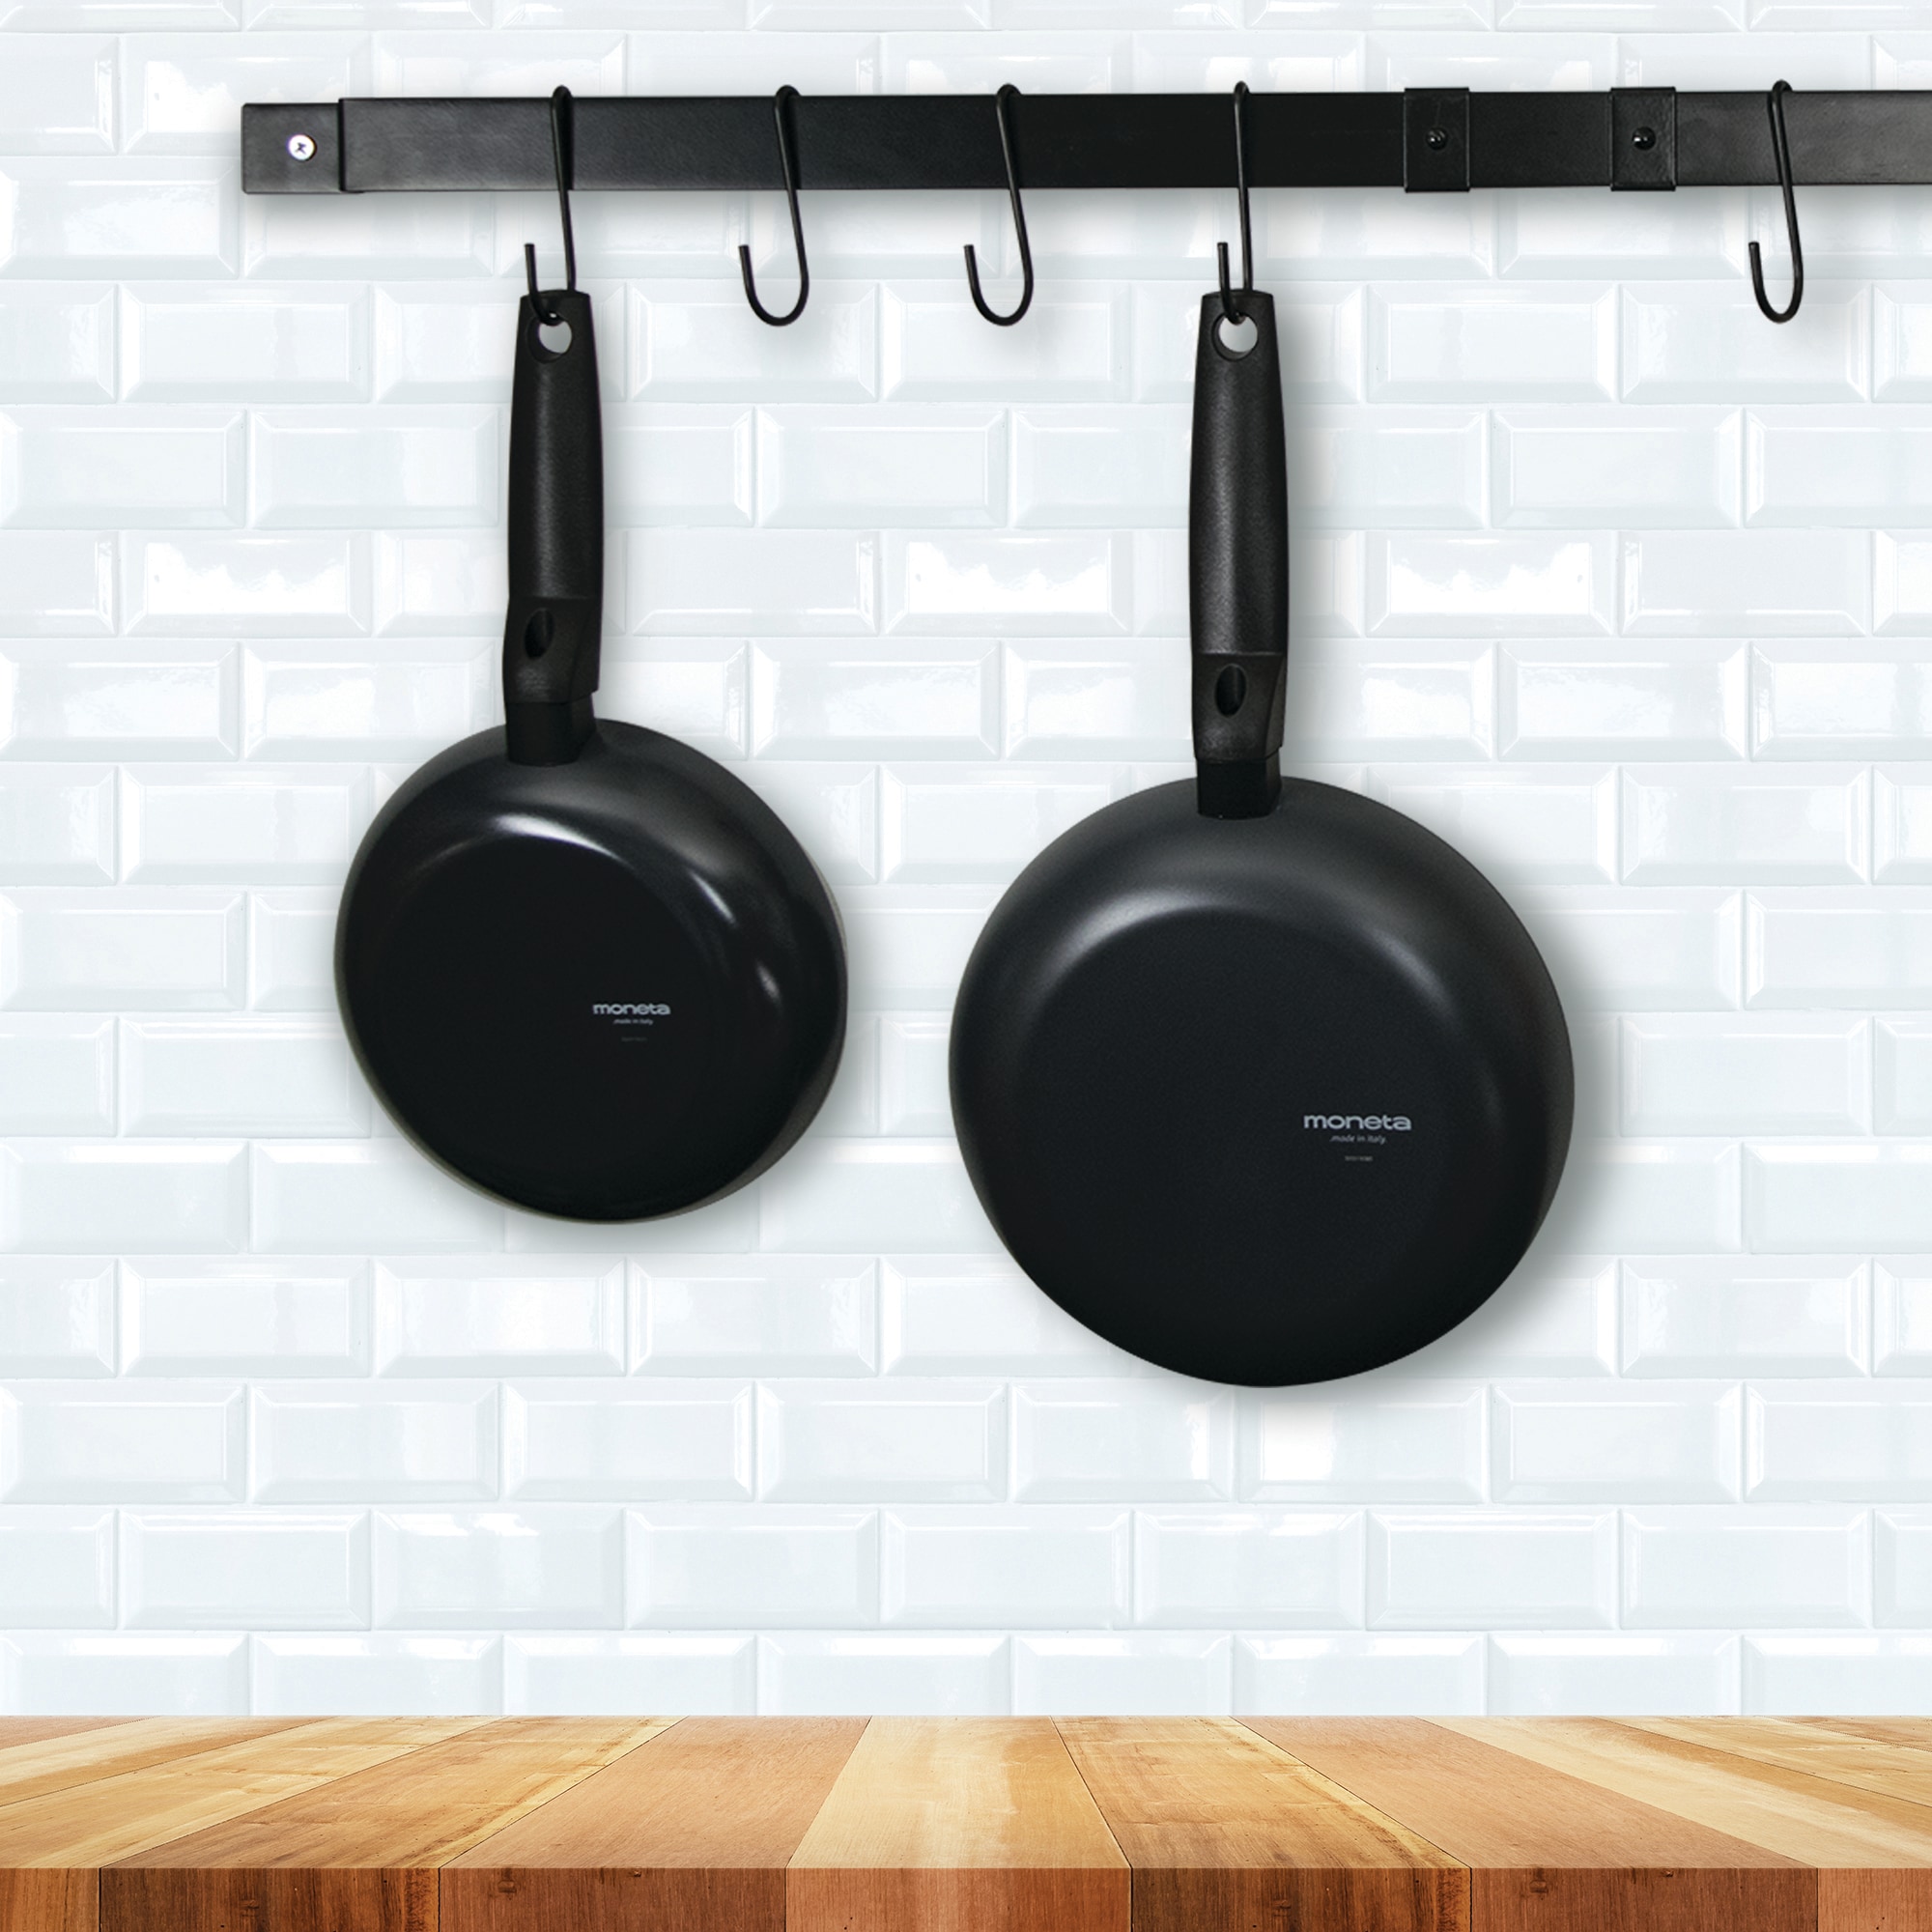 24 in. Black Wall Mounted Kitchen Pot Rack with 10-Hooks